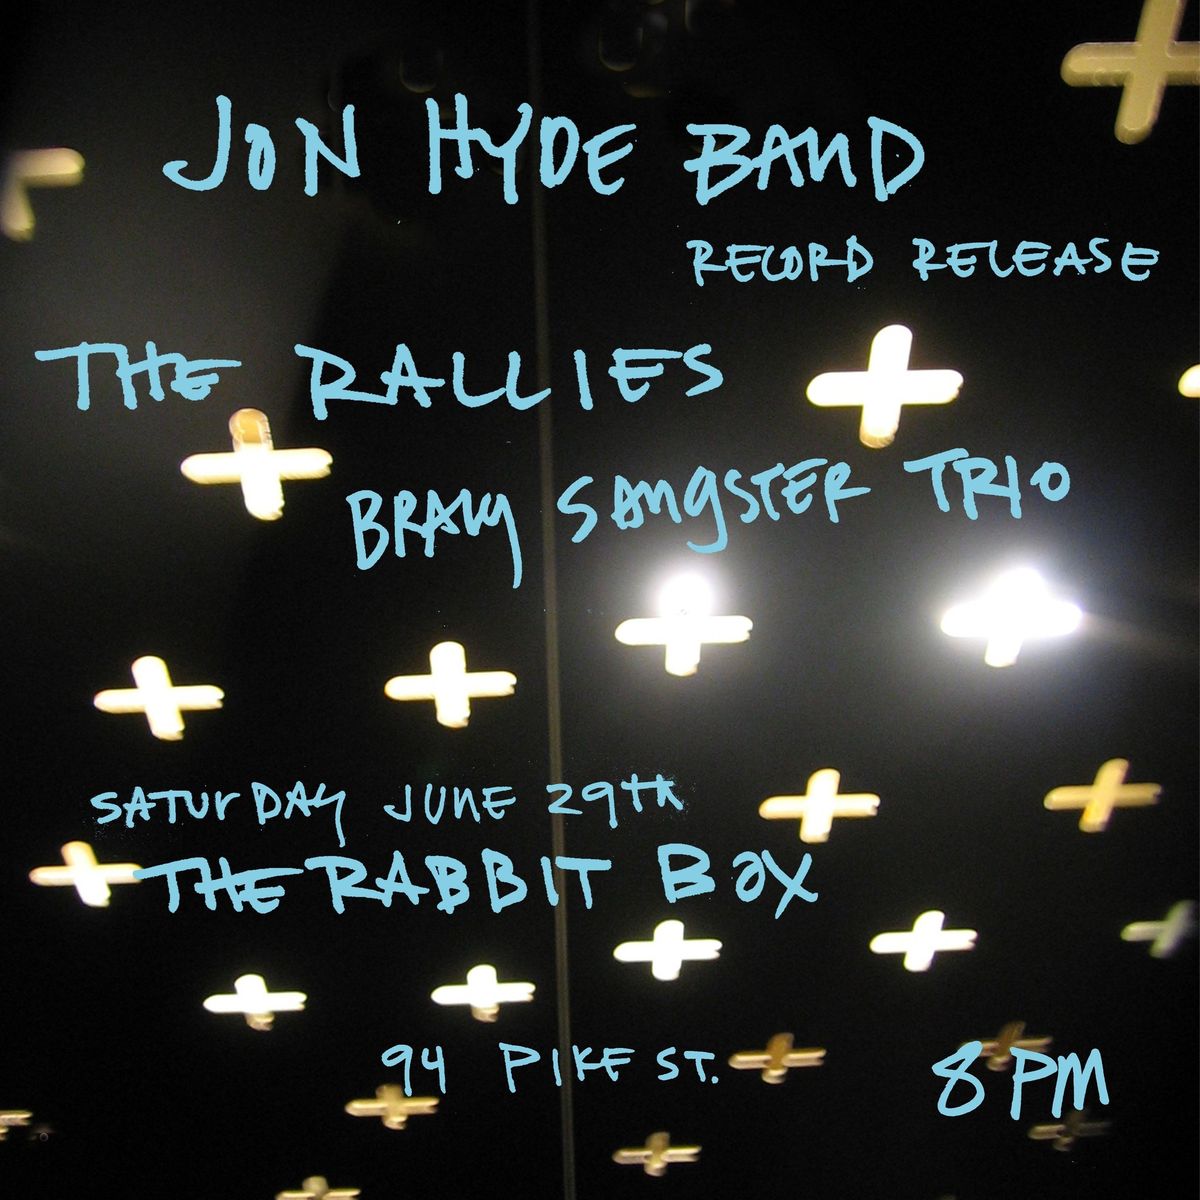 Jon Hyde Band  + The Rallies + Braly Sangster Trio